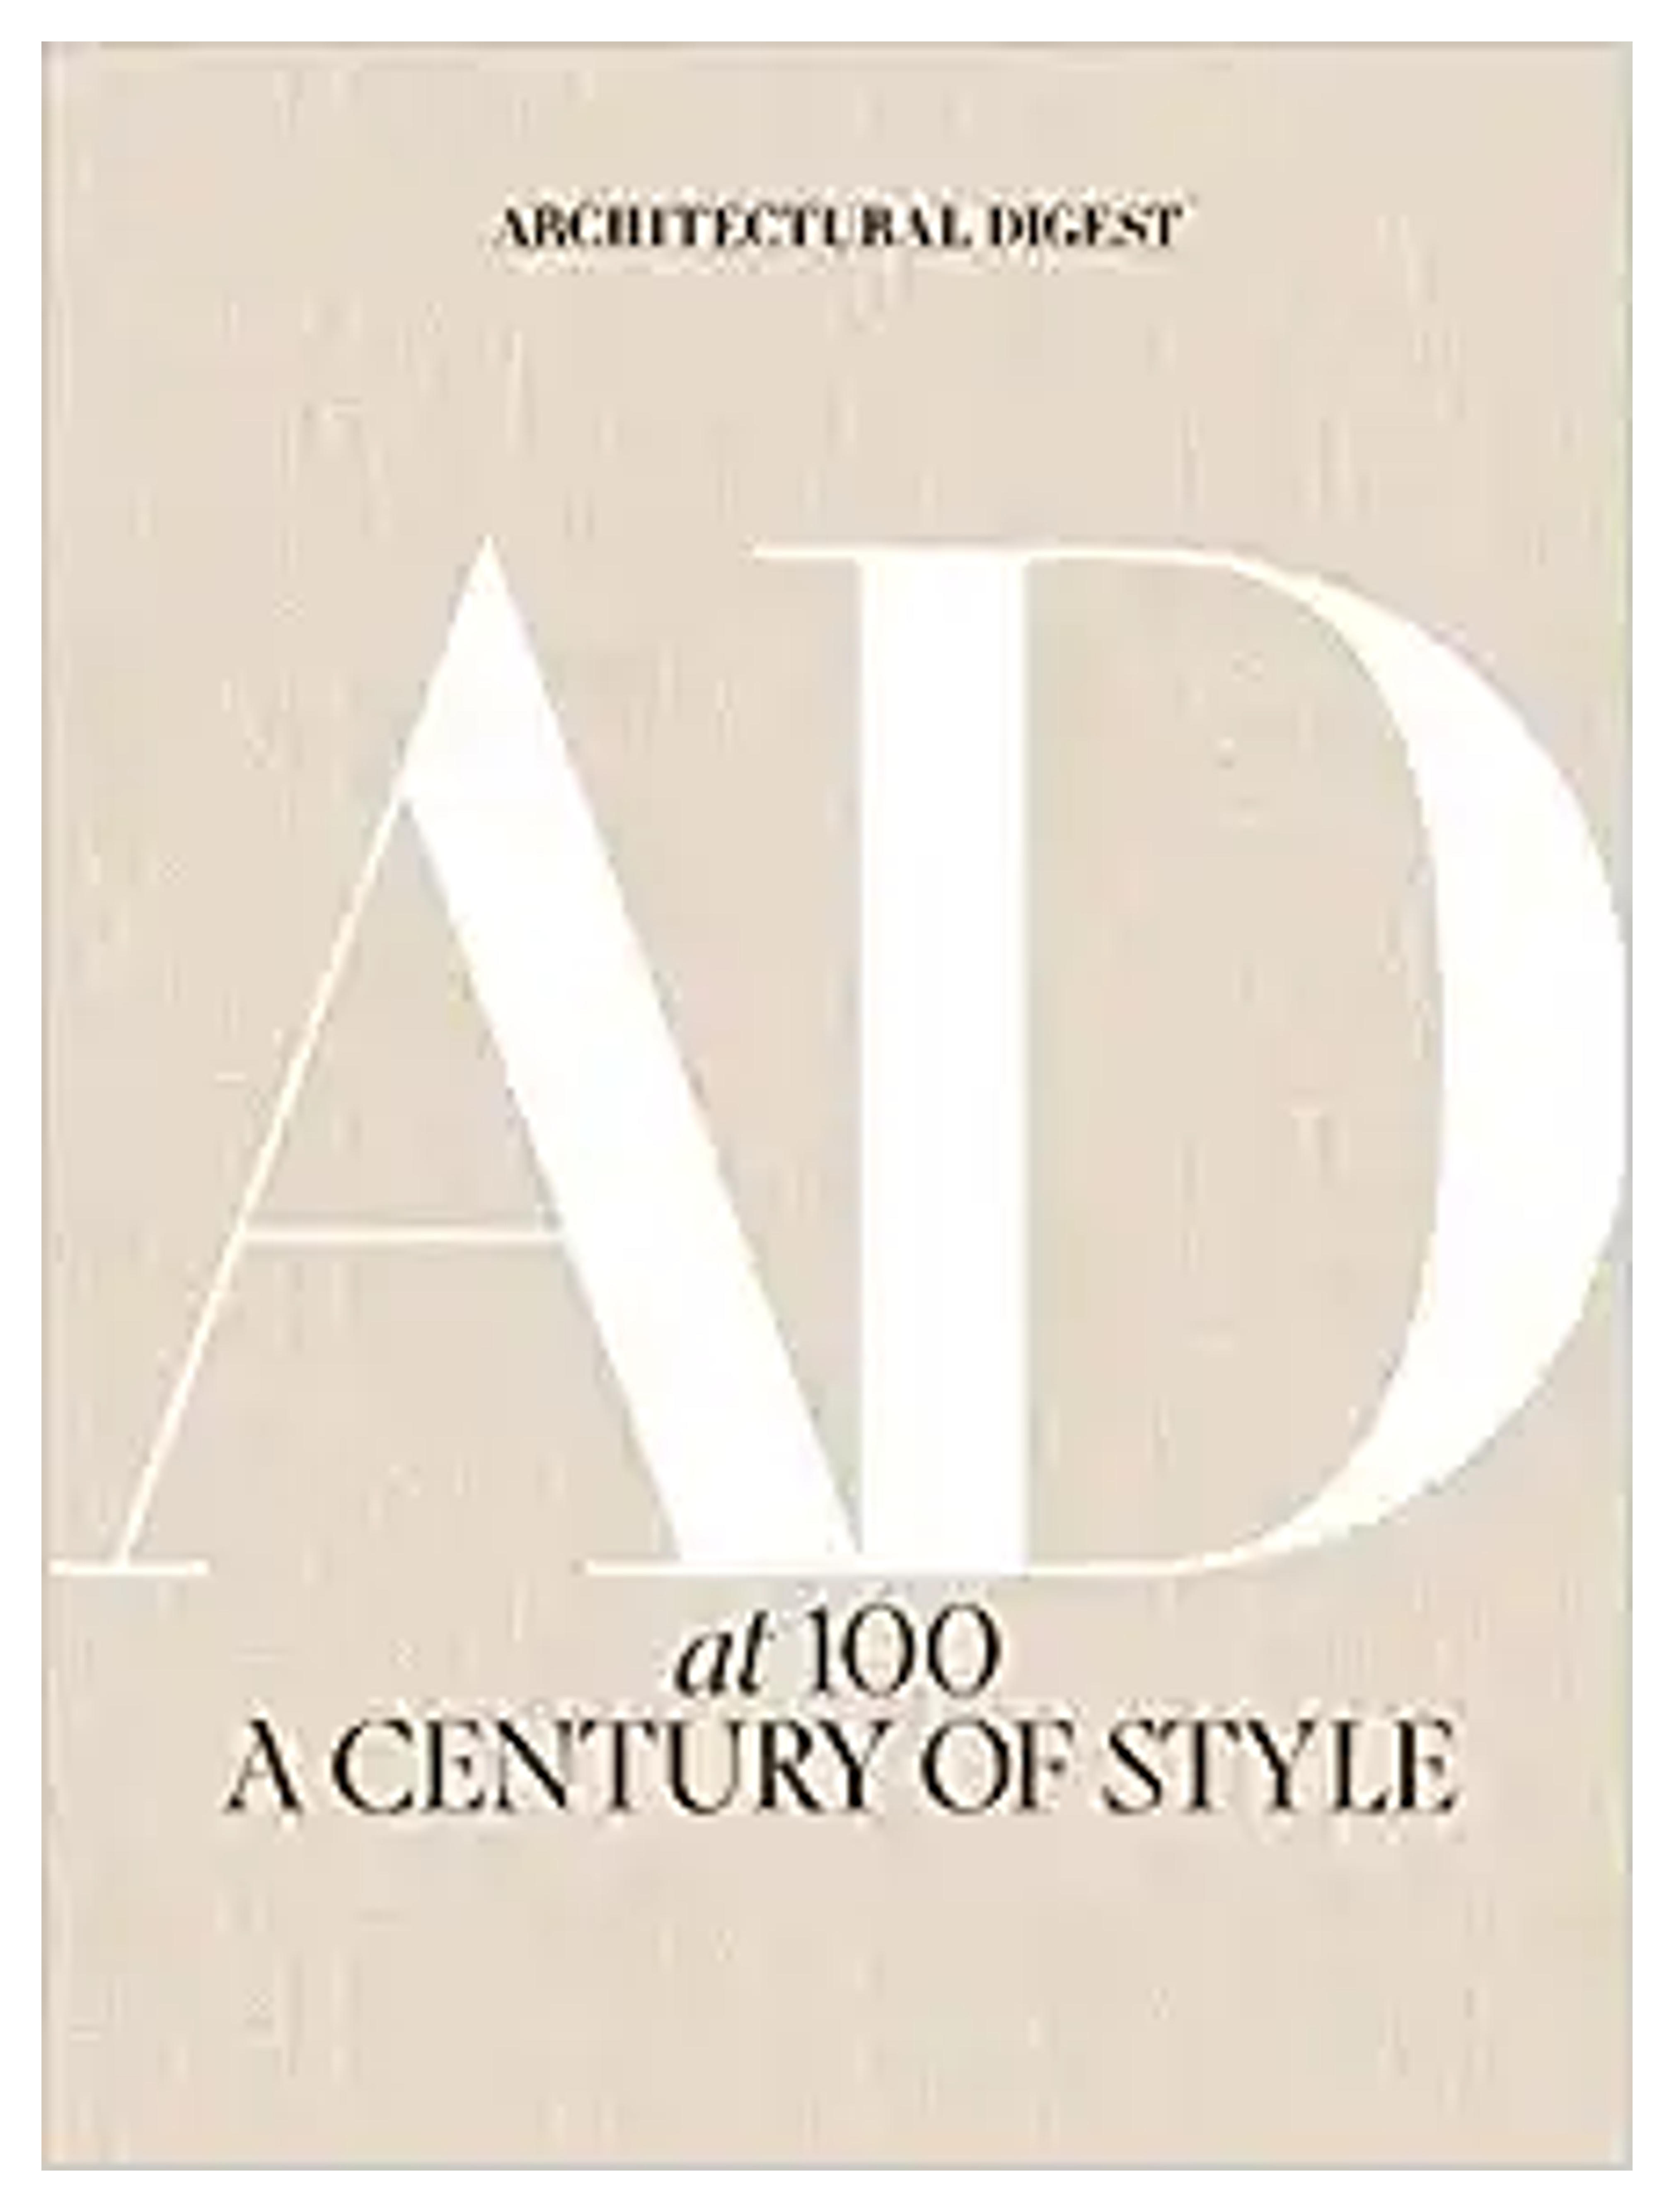 Architectural Digest at 100: A Century of Style: Architectural Digest, Astley, Amy, Wintour, Anna: 9781419733338: Amazon.com: Books